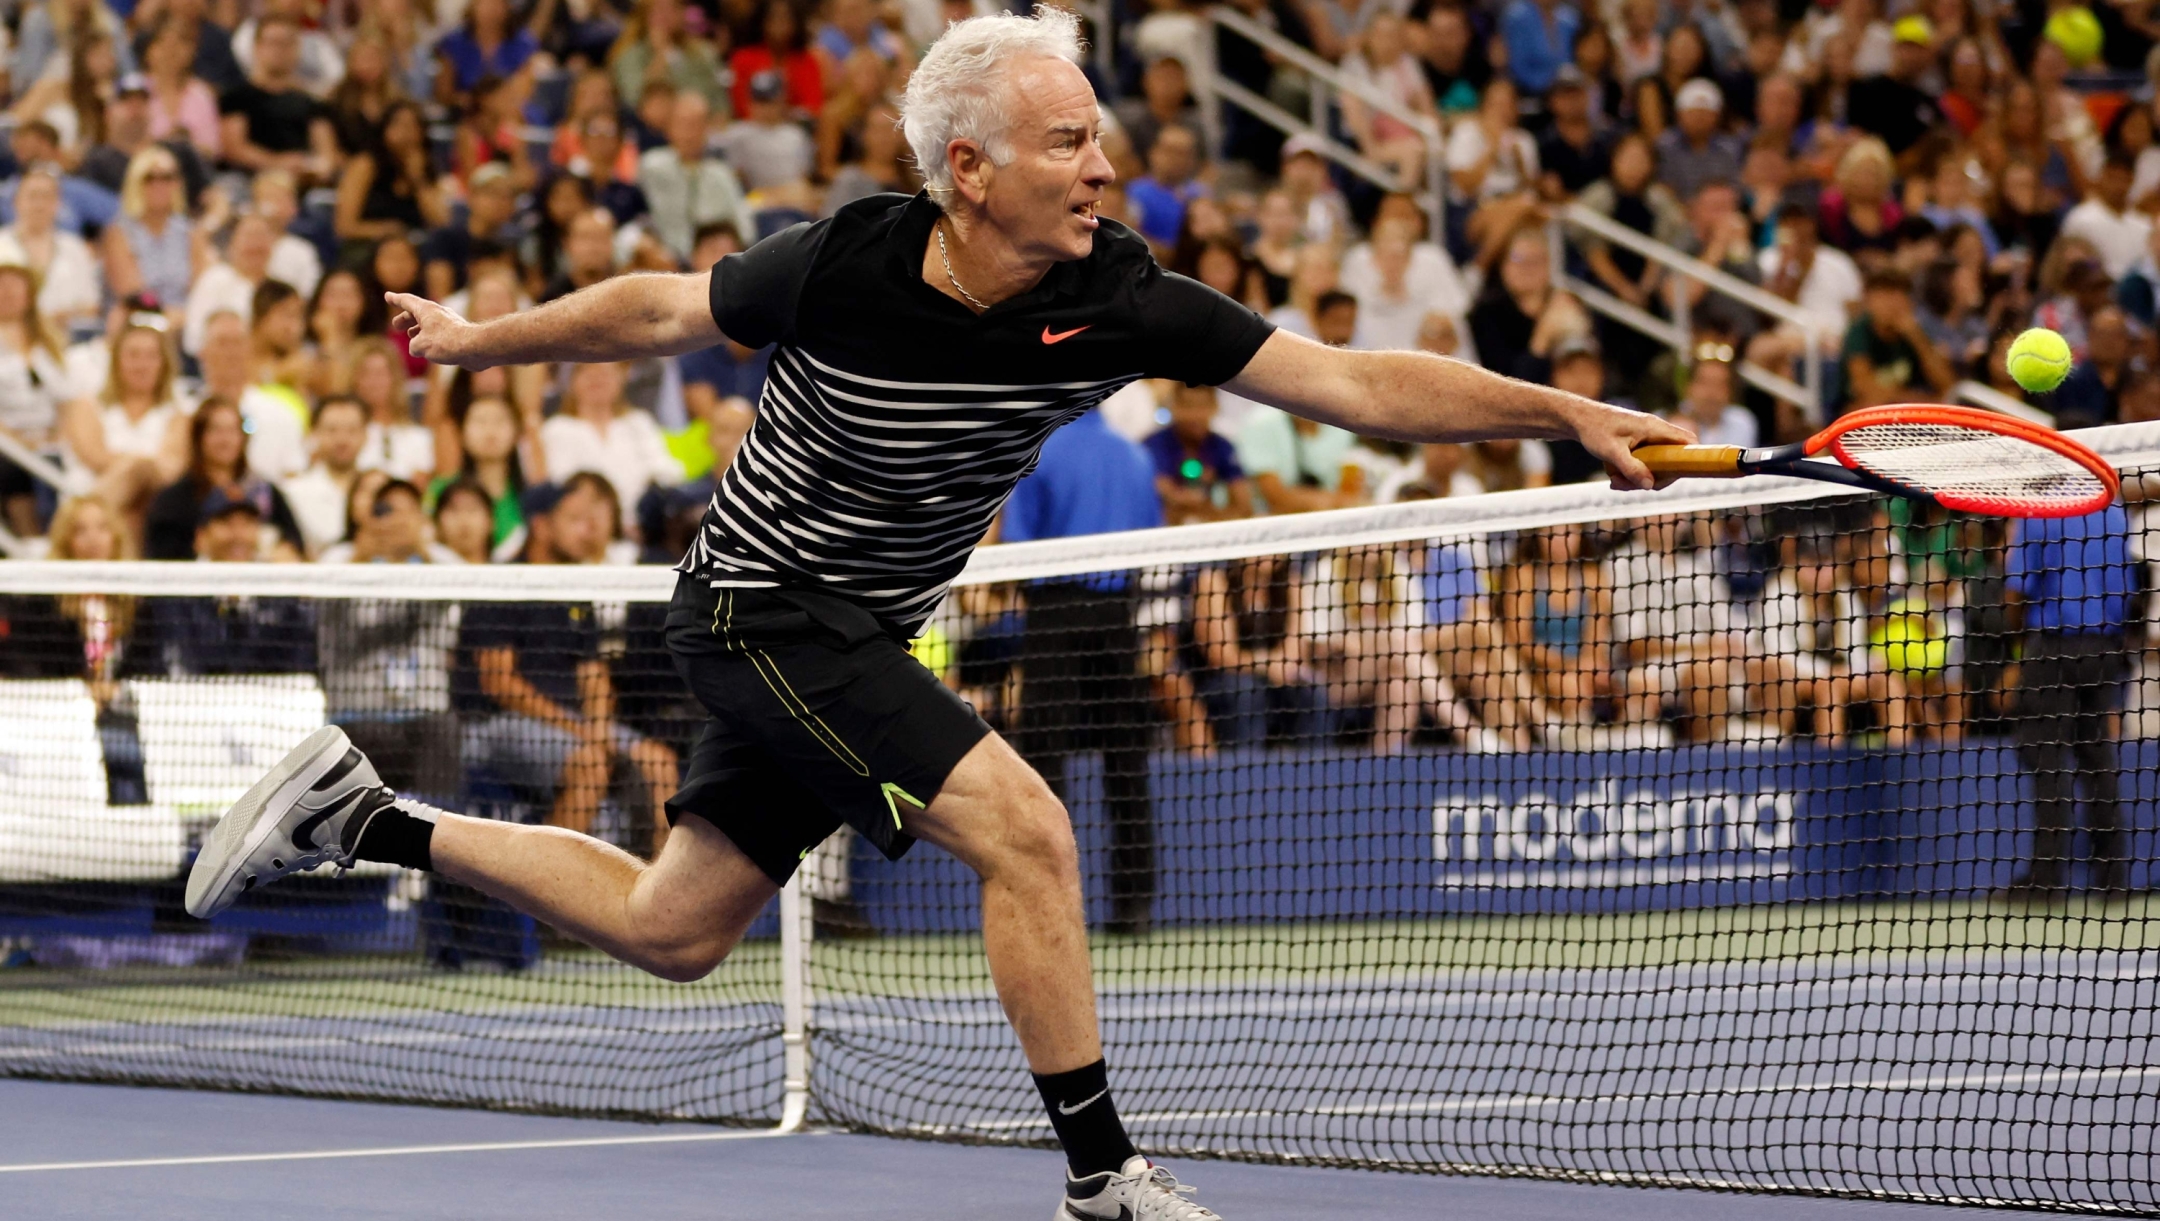 NEW YORK, NEW YORK - AUGUST 23: Former tennis player John McEnroe of the United States returns a shot while playing in the Stars of the Open Exhibition Match to Benefit Ukraine Relief prior to the 2023 US Open at USTA Billie Jean King National Tennis Center on August 23, 2023 in New York City.   Sarah Stier/Getty Images/AFP (Photo by Sarah Stier / GETTY IMAGES NORTH AMERICA / Getty Images via AFP)